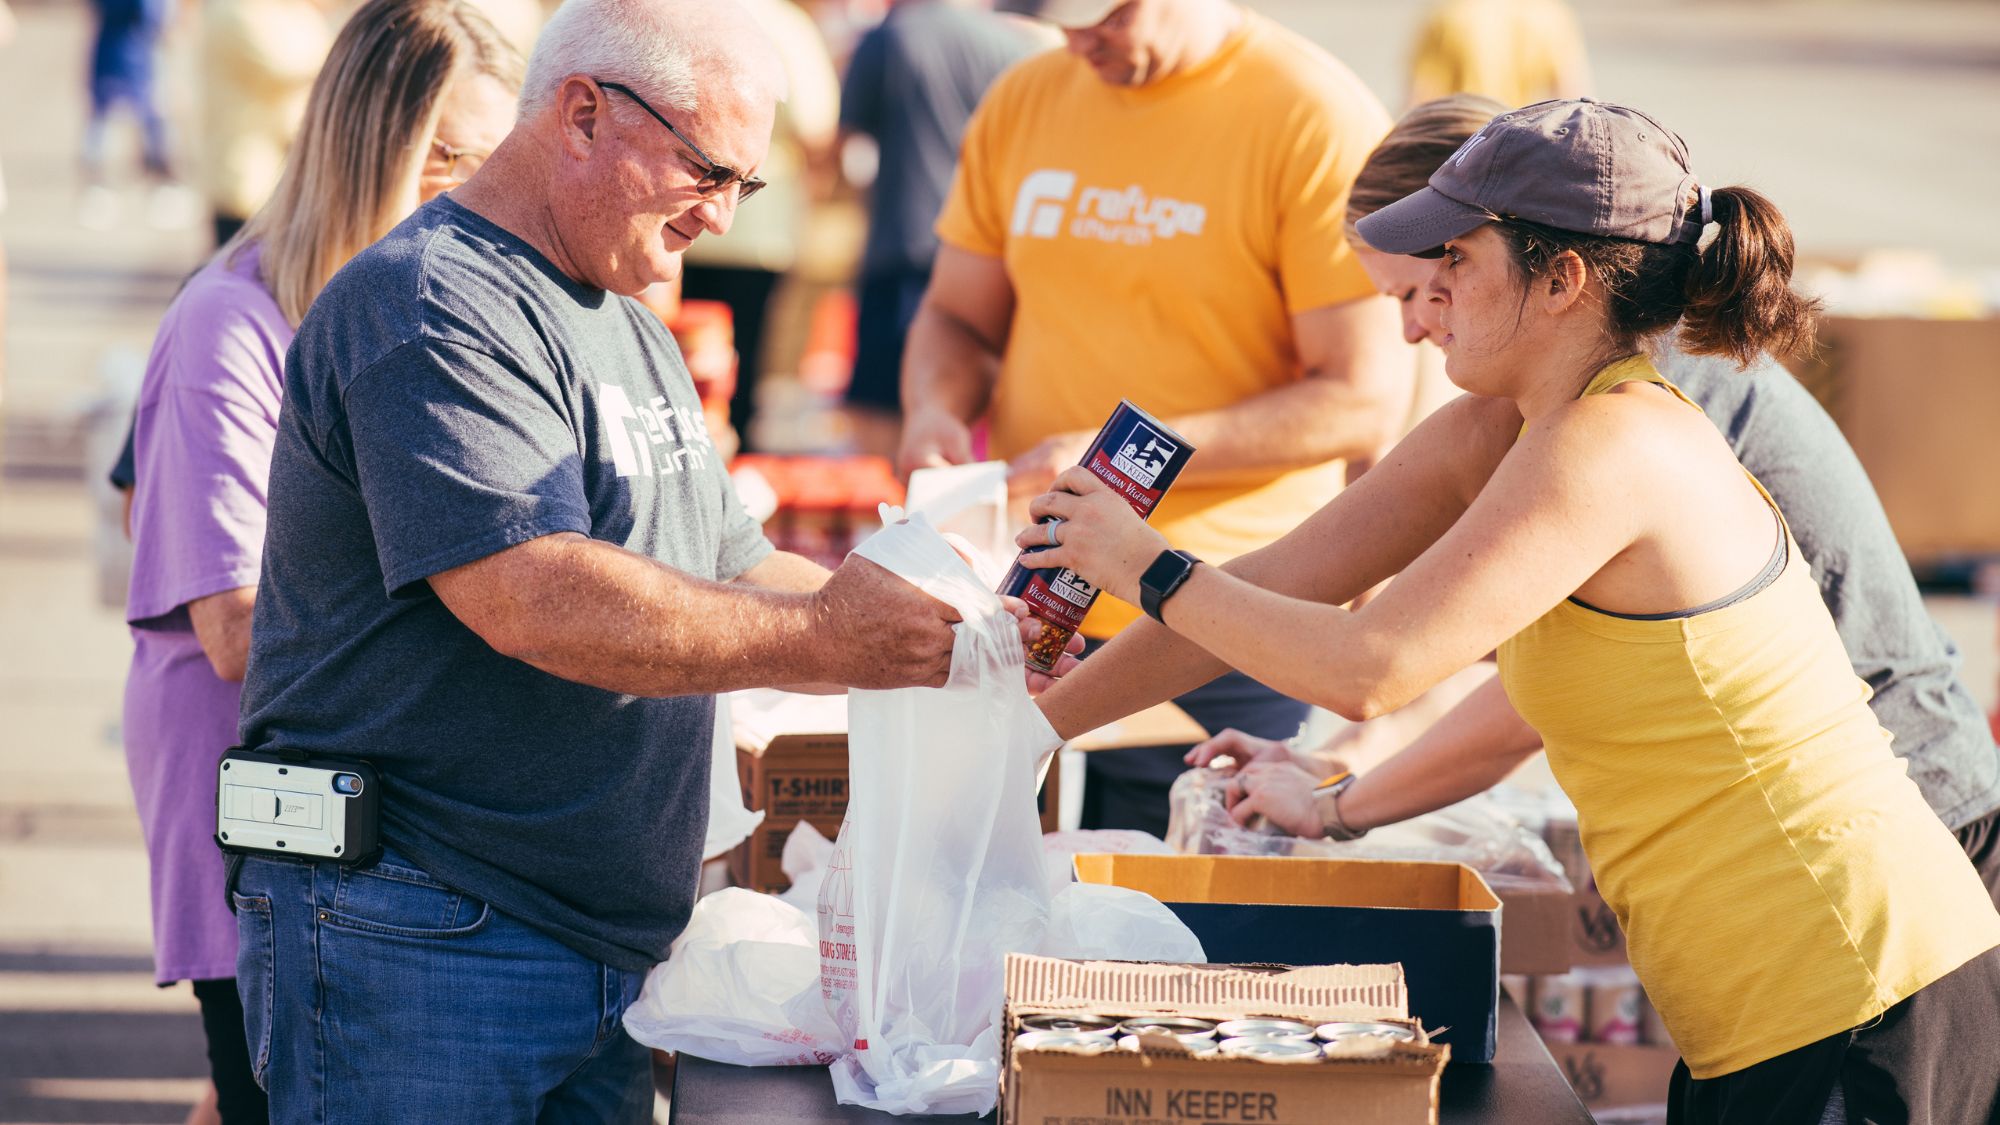 A woman in a yellow tank top and gray ball cap places canned foods into a grocery bag held by a man in a gray T-shirt